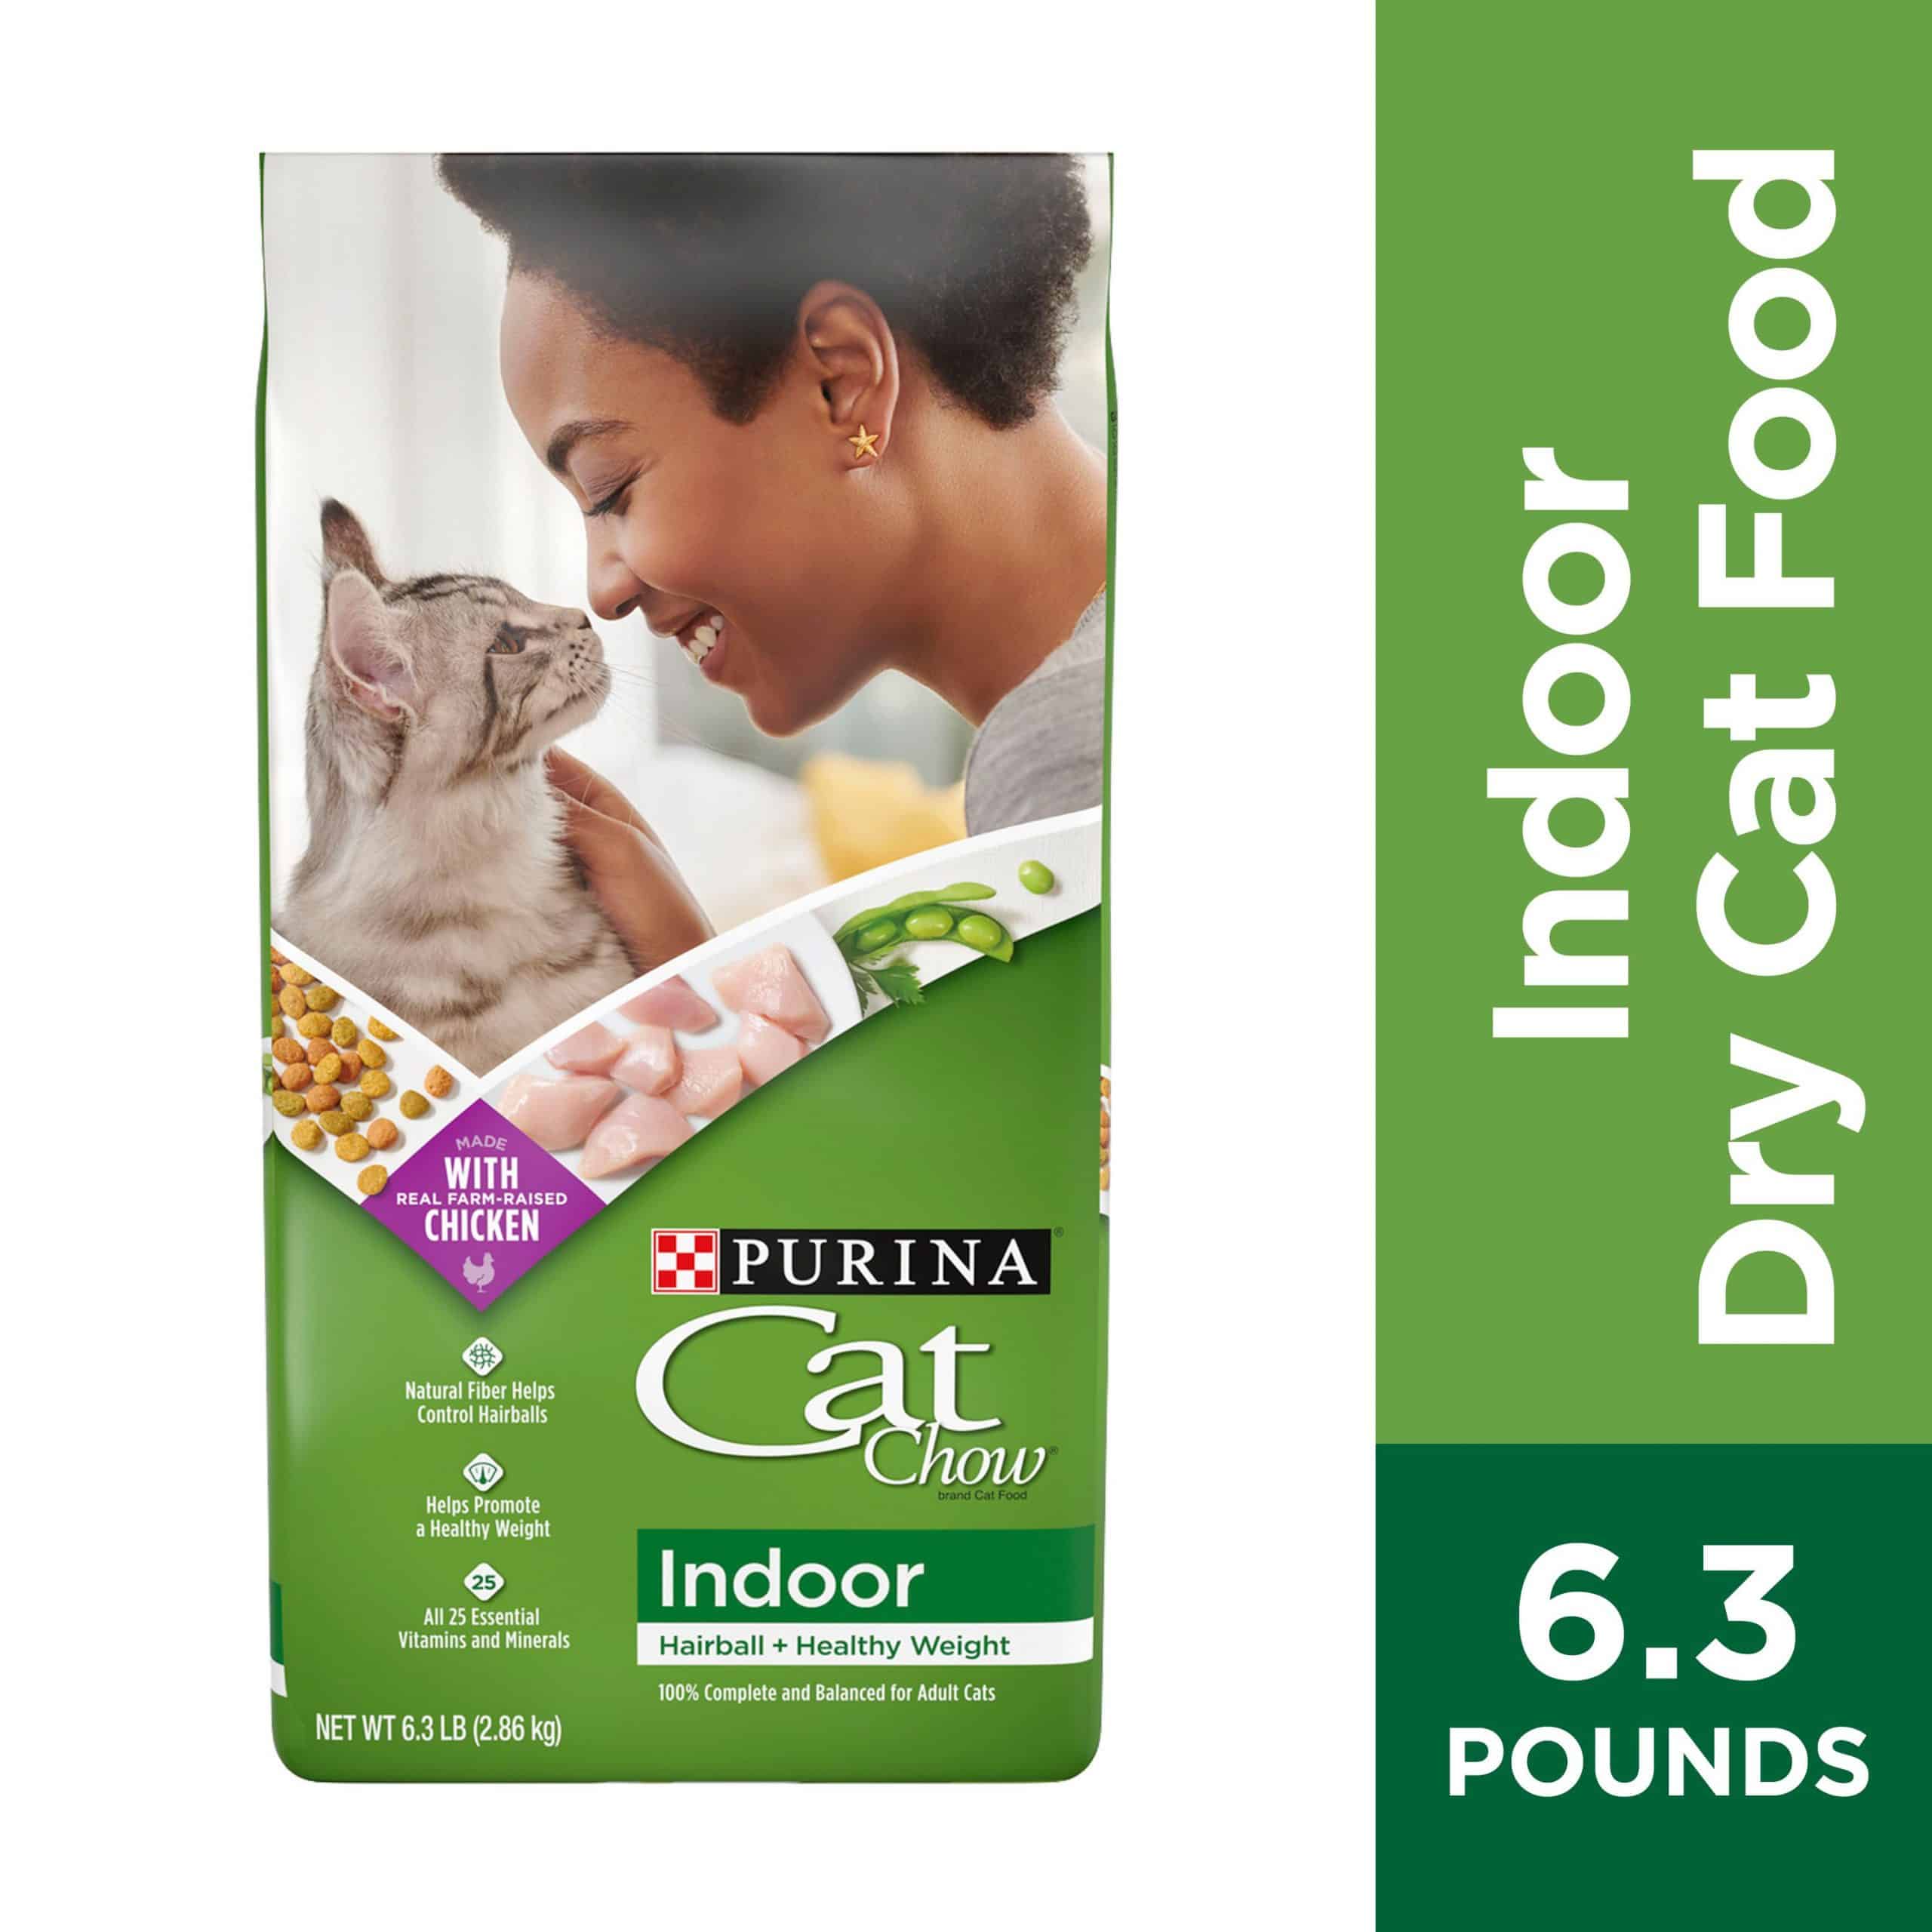 Purina Cat Chow Indoor Dry Cat Food, Hairball + Healthy Weight, 6.3 lb ...